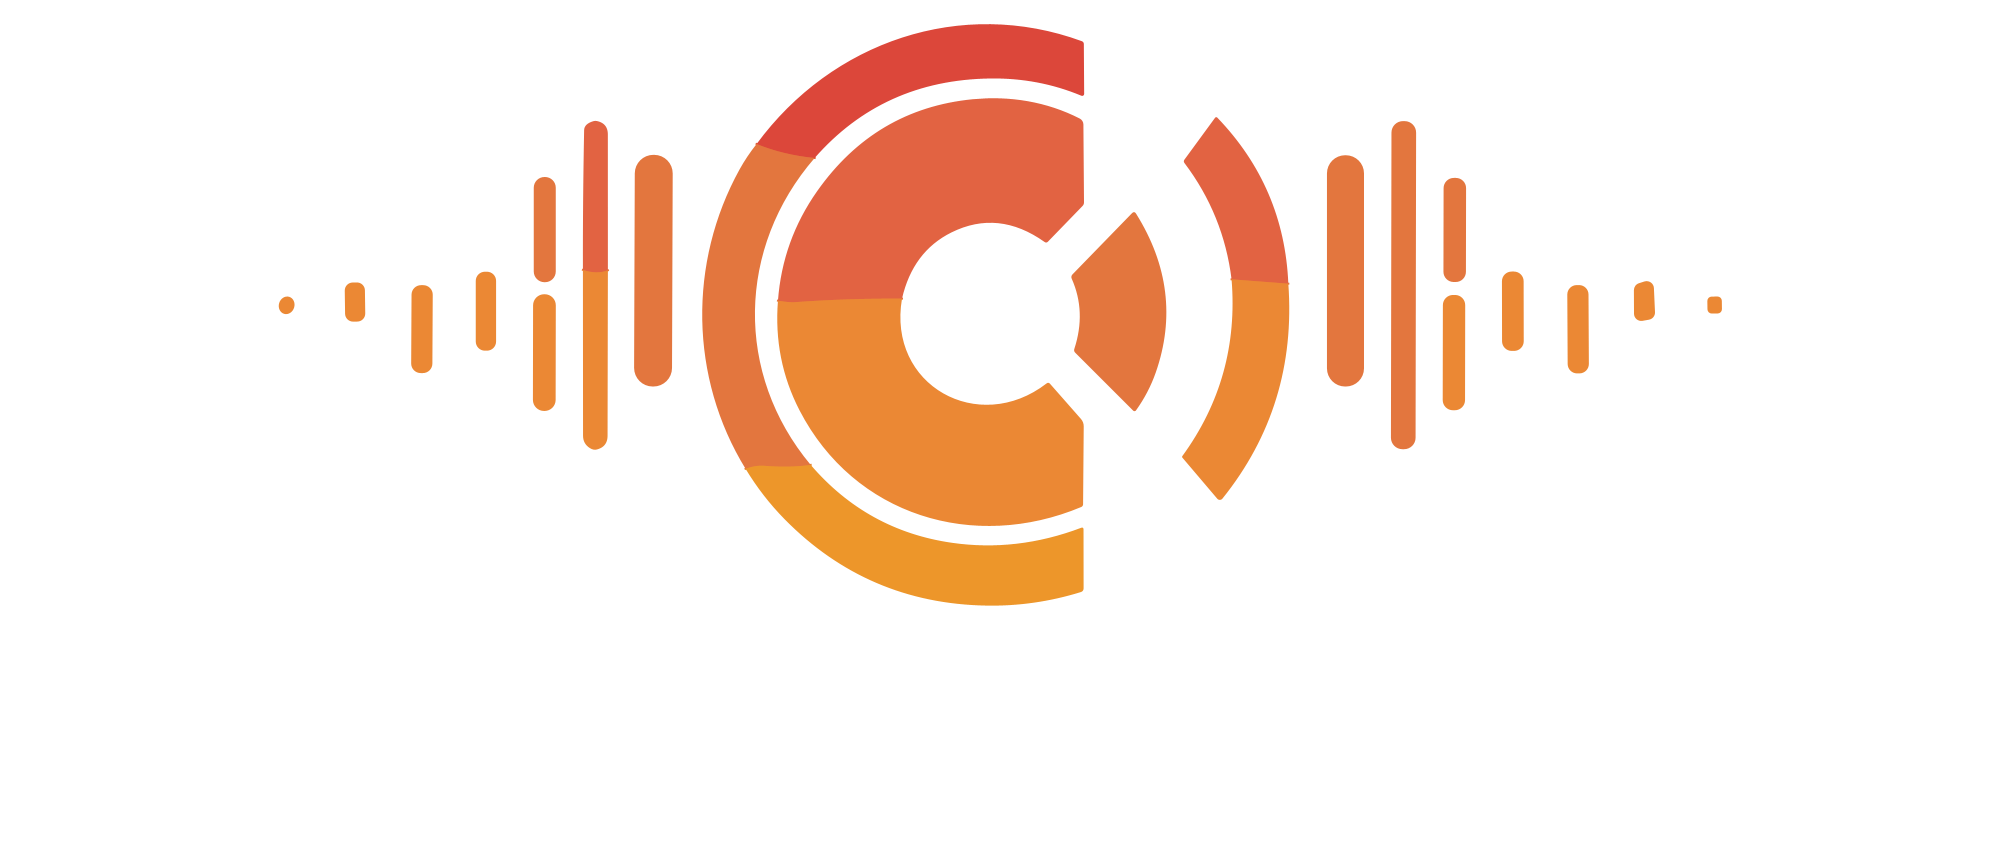 Syncntune0.3 (2)